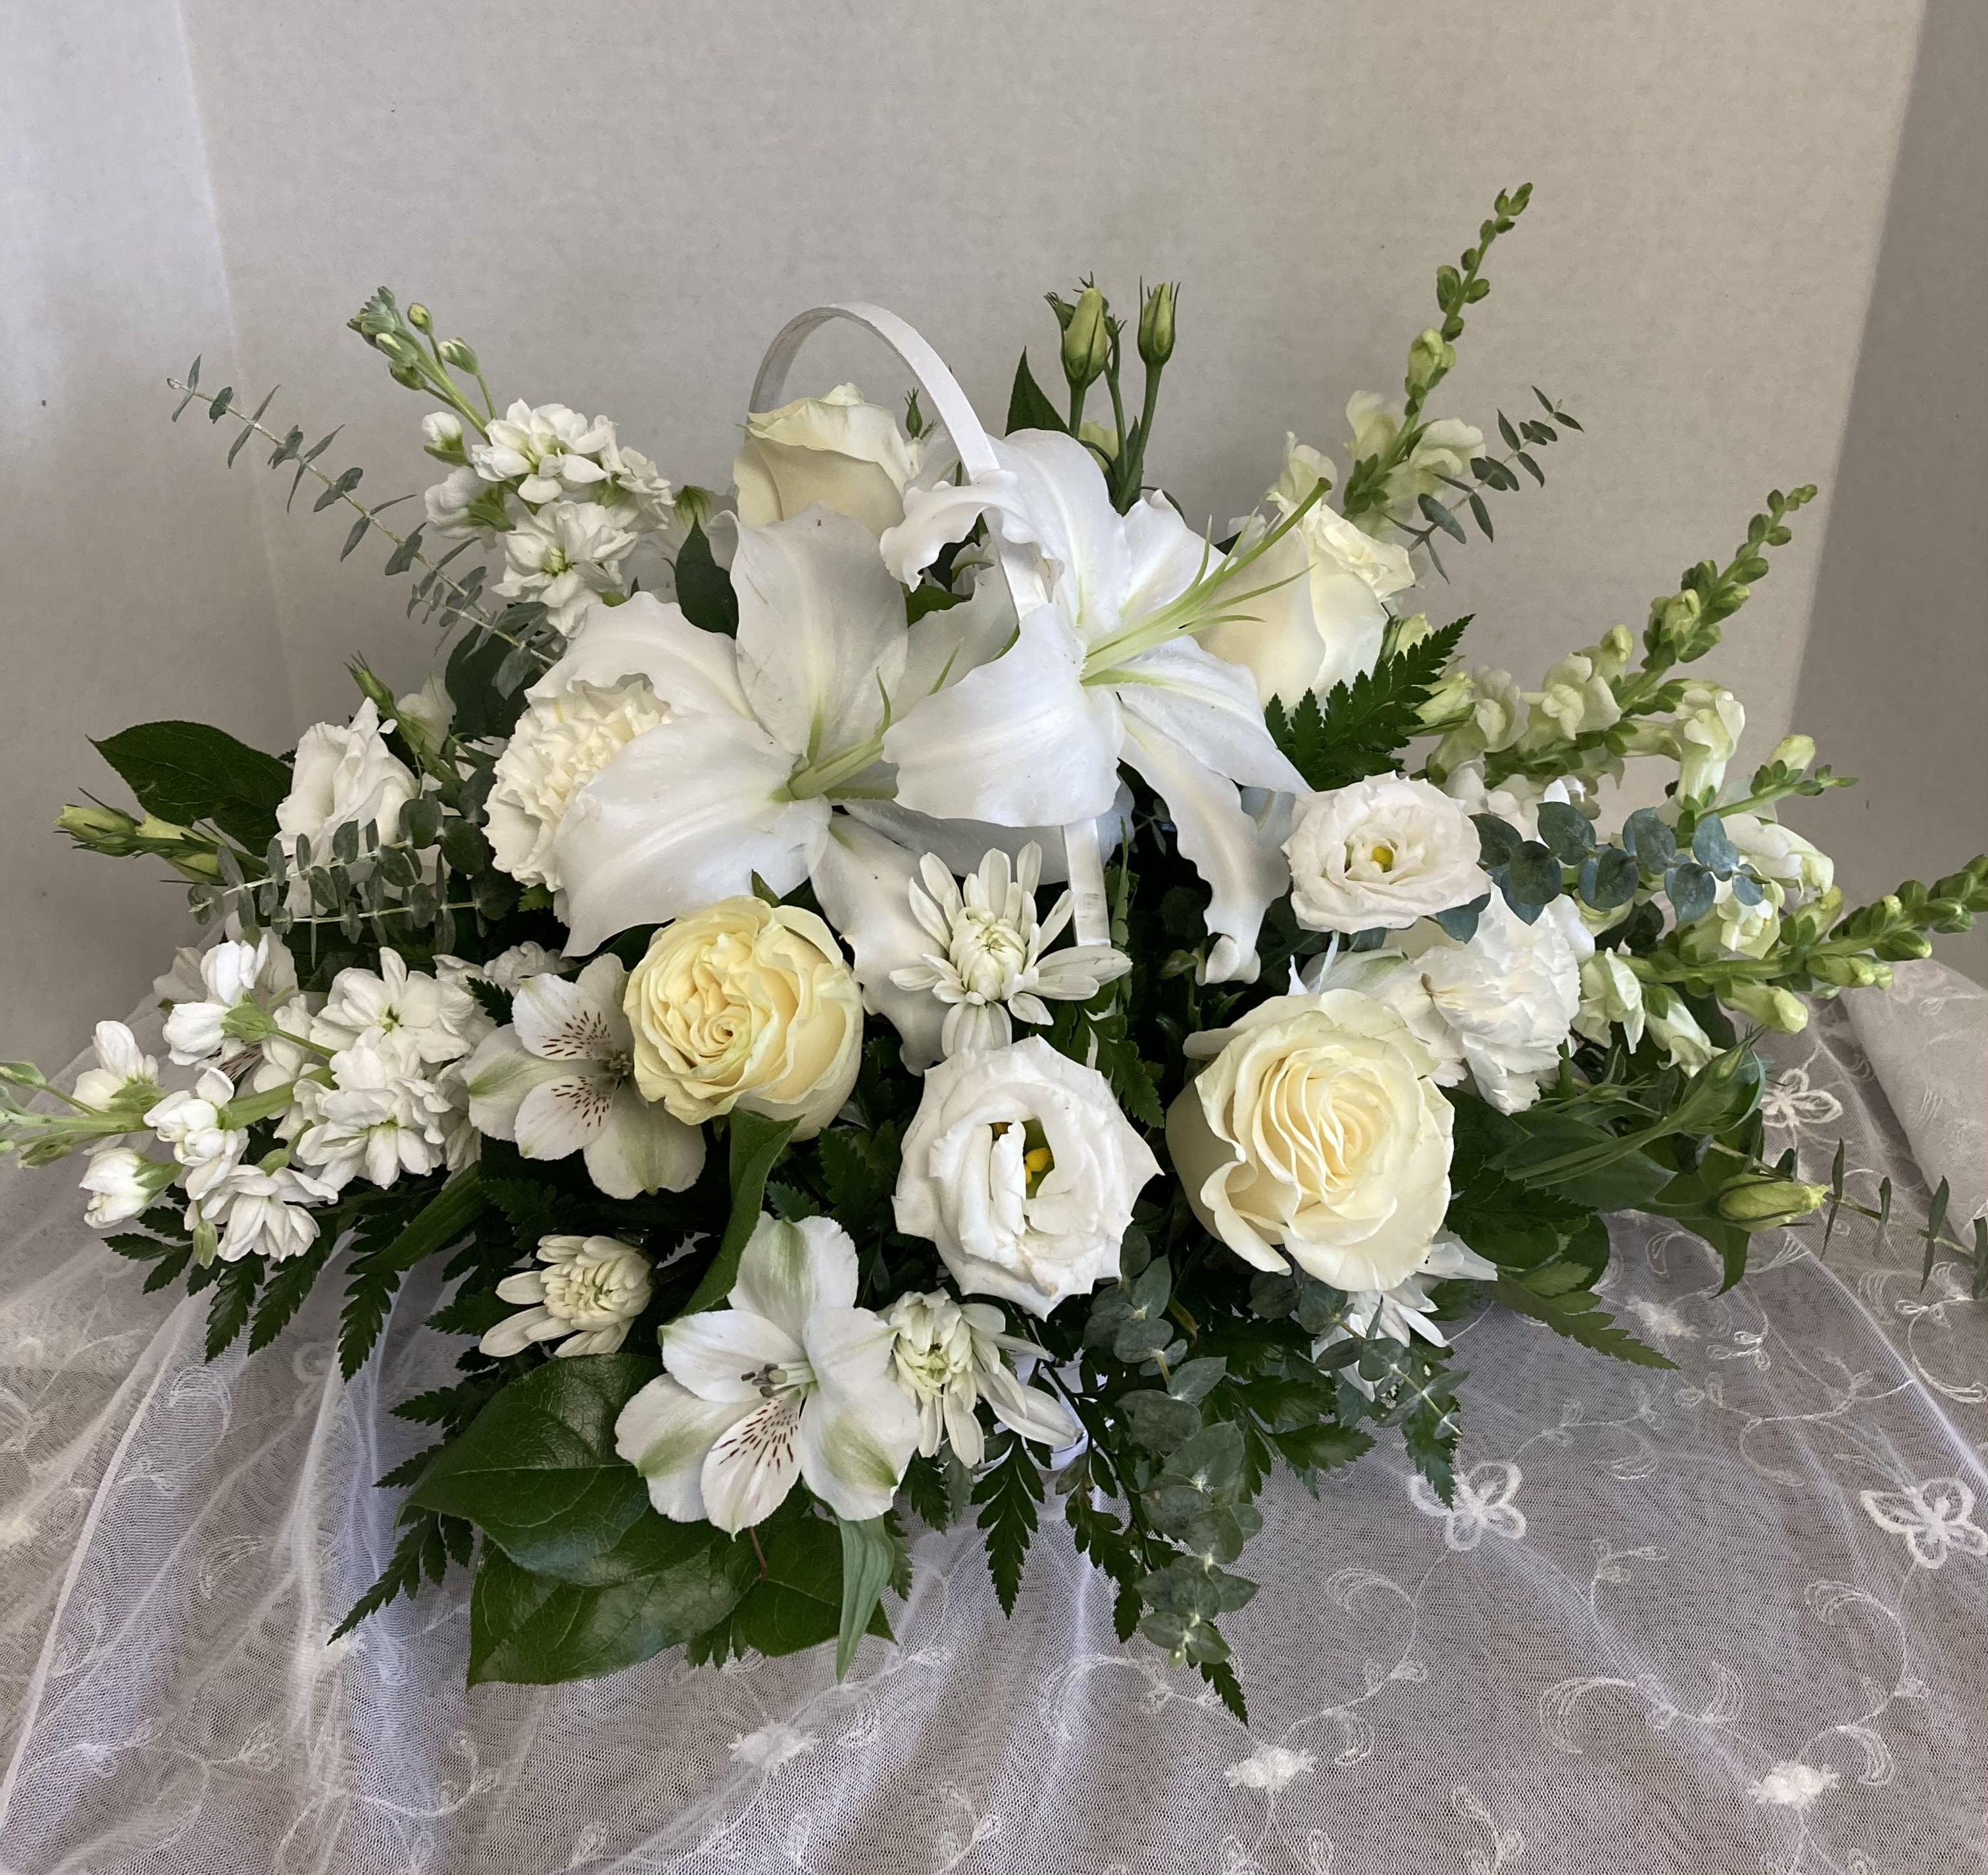 Journey of Love - Elegant whites, expression of sympathy as well as a lovely gift for many occassions.   Suitable for funeral service and home delivery.  Featuring roses, stock, lily, alstromeria and more